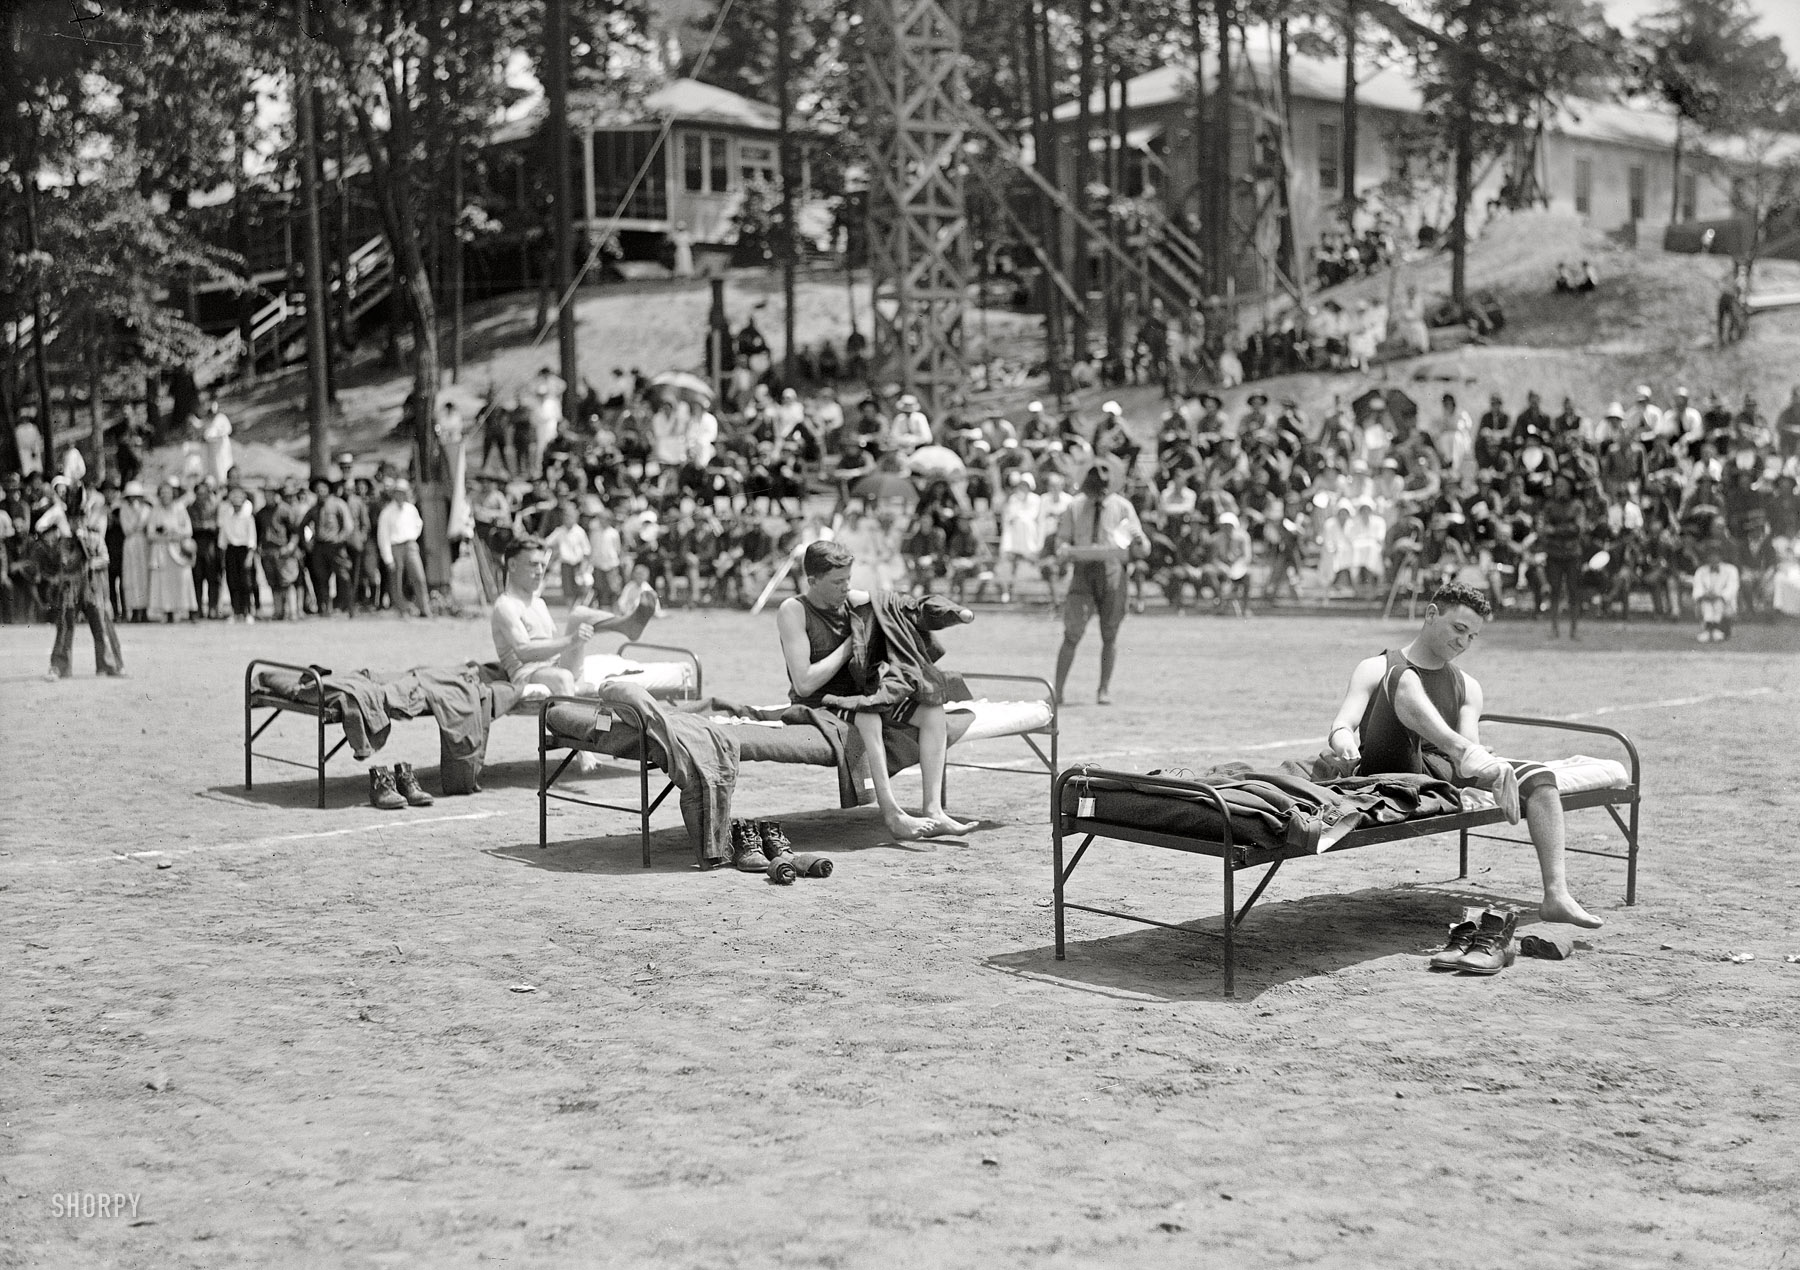 1919. "Fourth of July. Scenes in celebration at Walter Reed Hospital." The ever-popular Competitive Napping event, maybe. Or would this demonstration have another purpose? Harris & Ewing Collection. View full size.